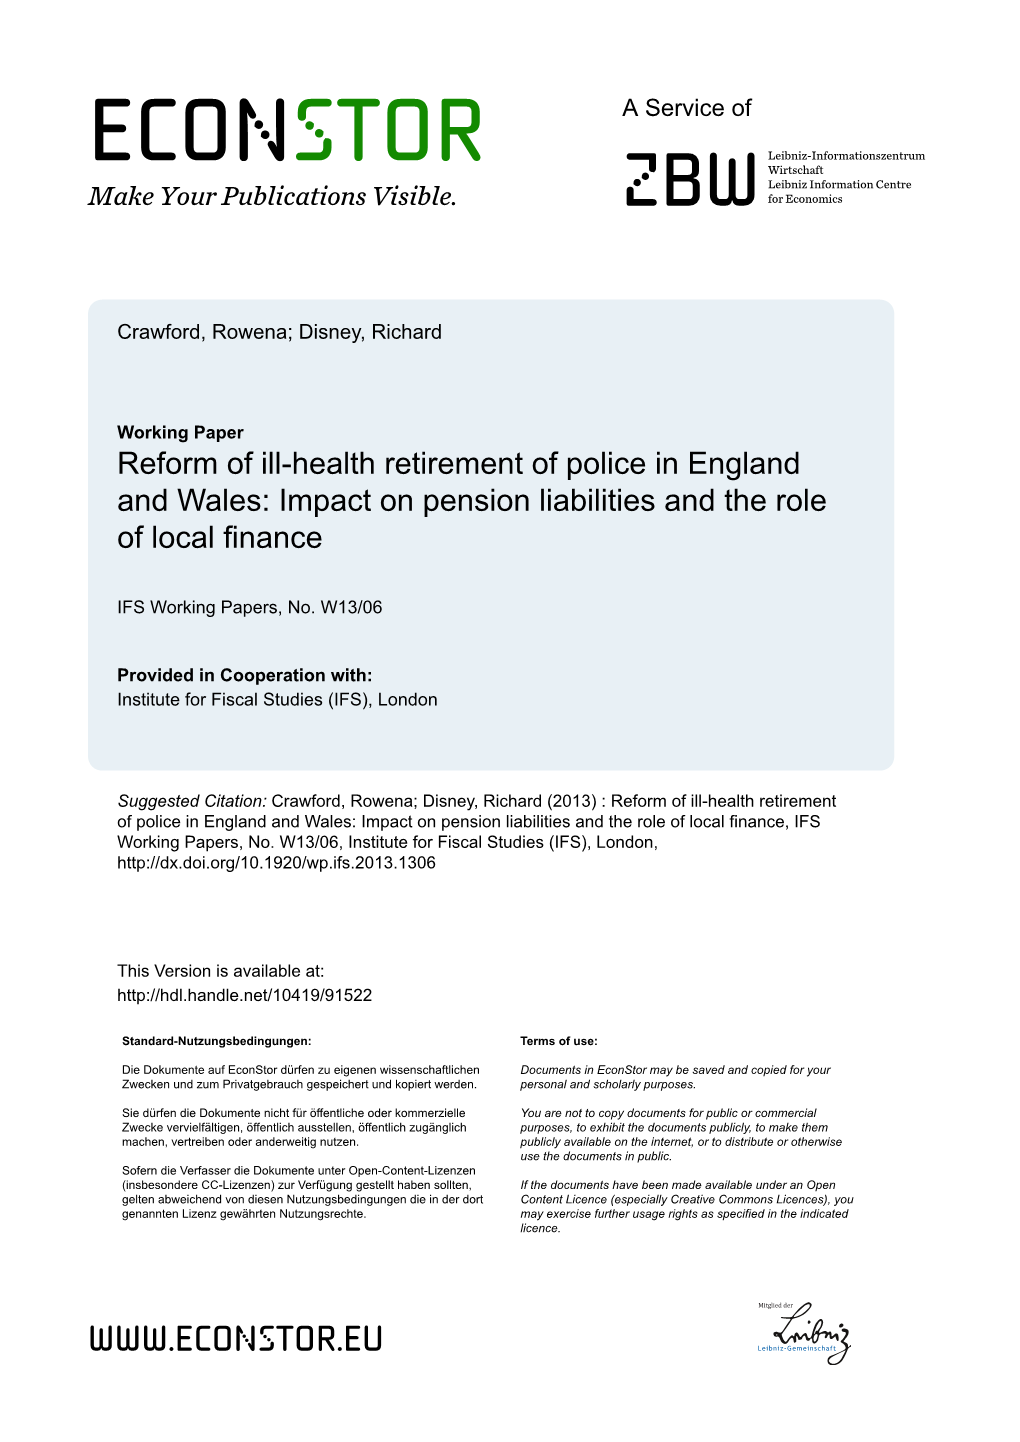 Reform of Ill-Health Retirement of Police in England and Wales: Impact on Pension Liabilities and the Role of Local Finance